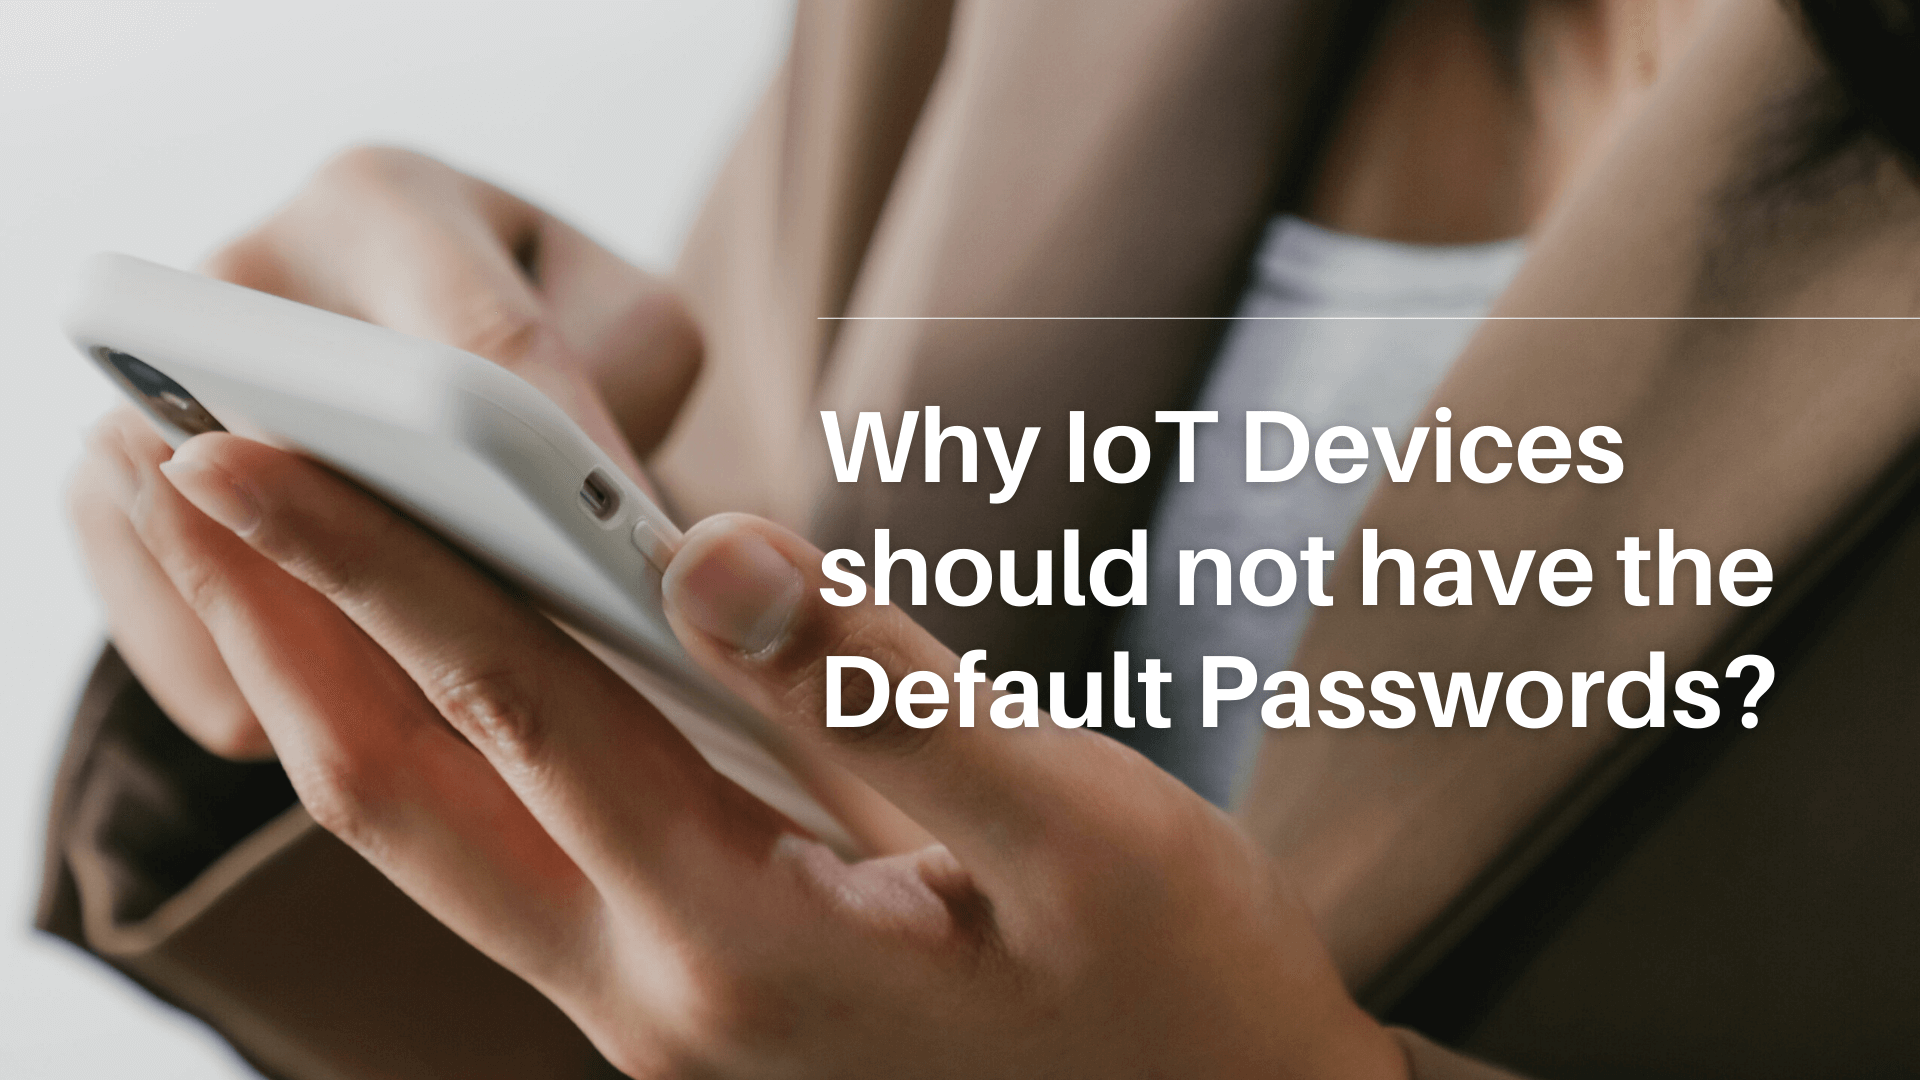 Why IoT Devices should not have the Default Passwords?